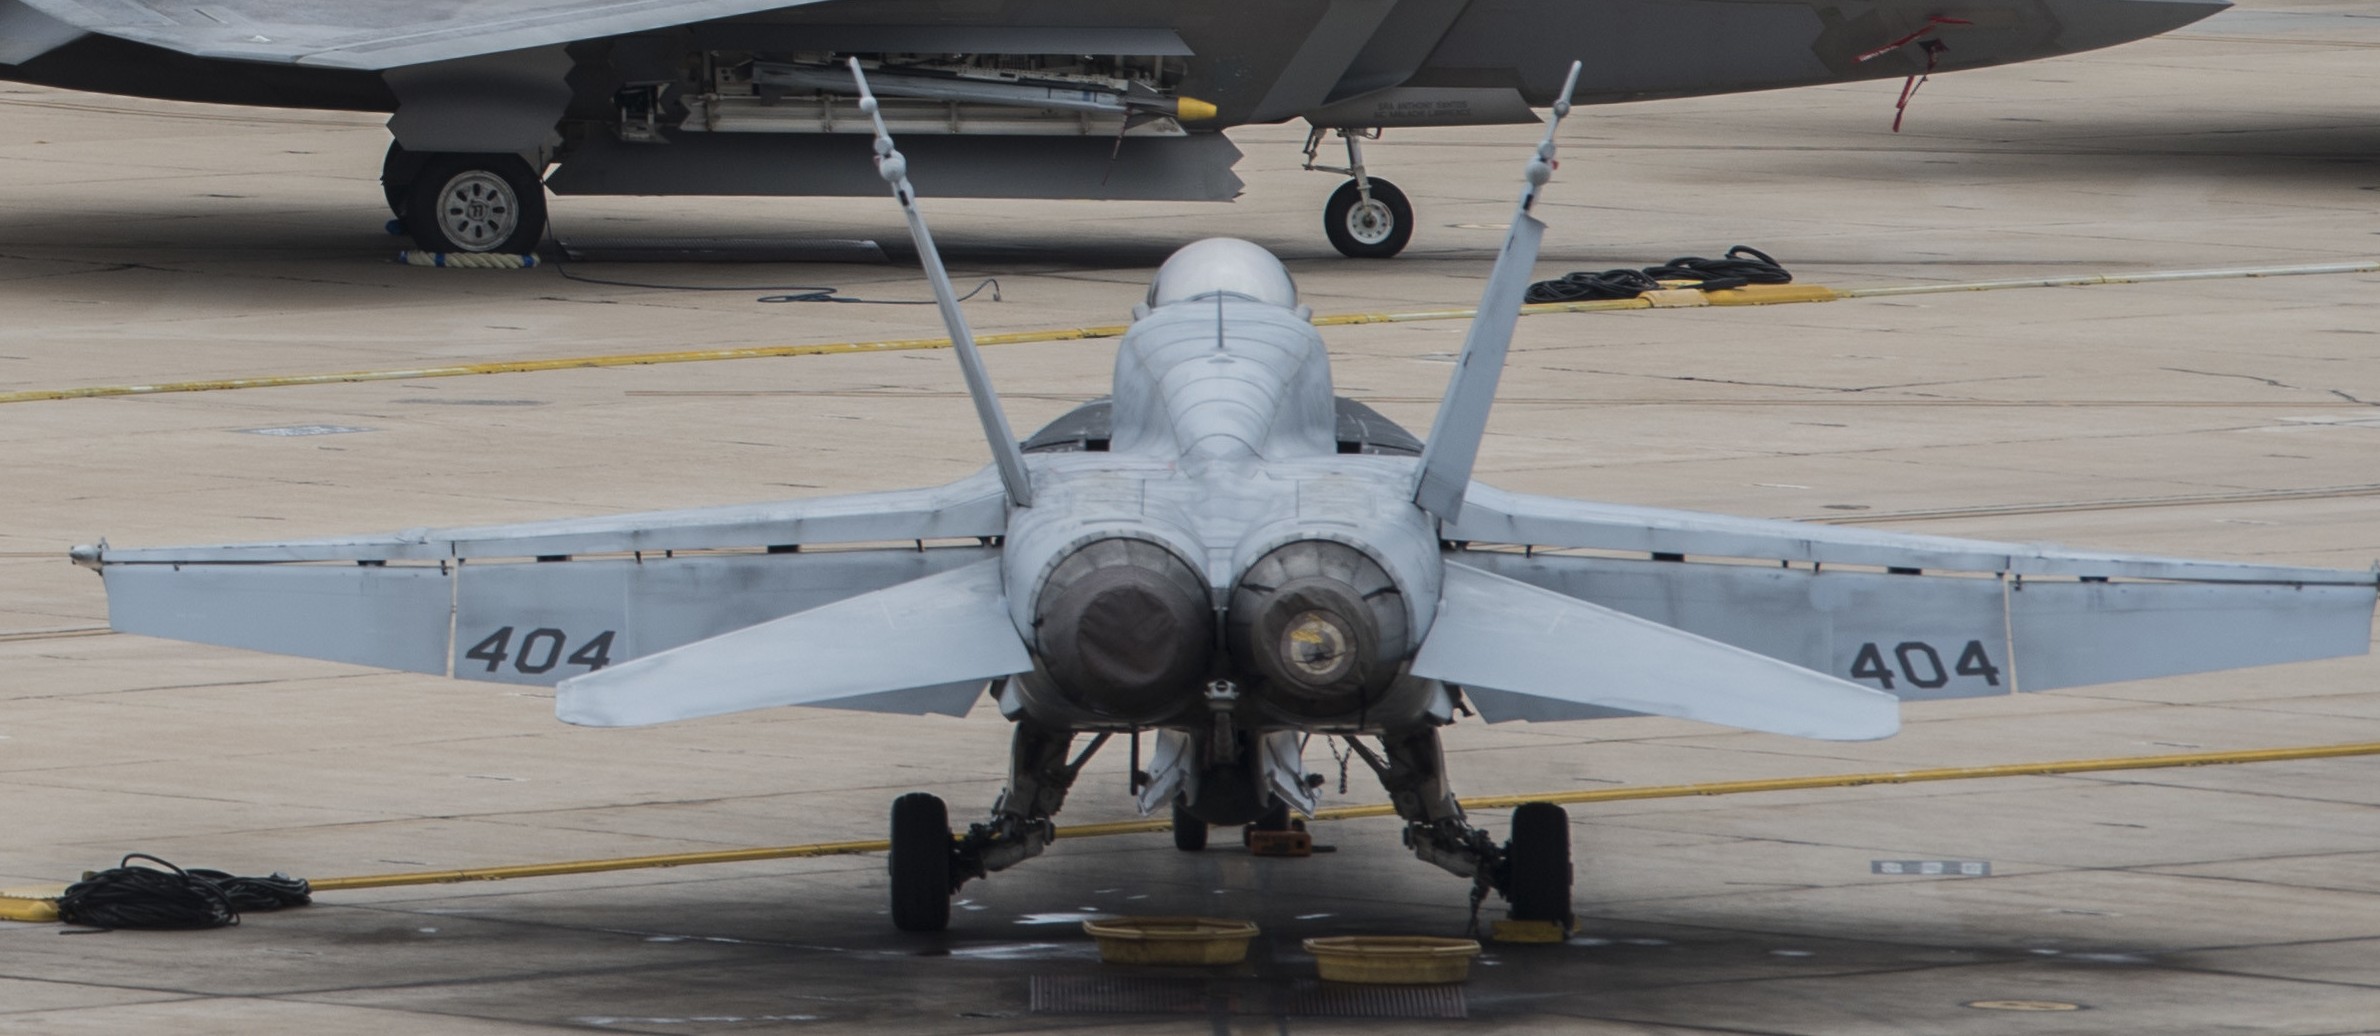 vmfa-323 death rattlers marine fighter attack squadron f/a-18c hornet 37